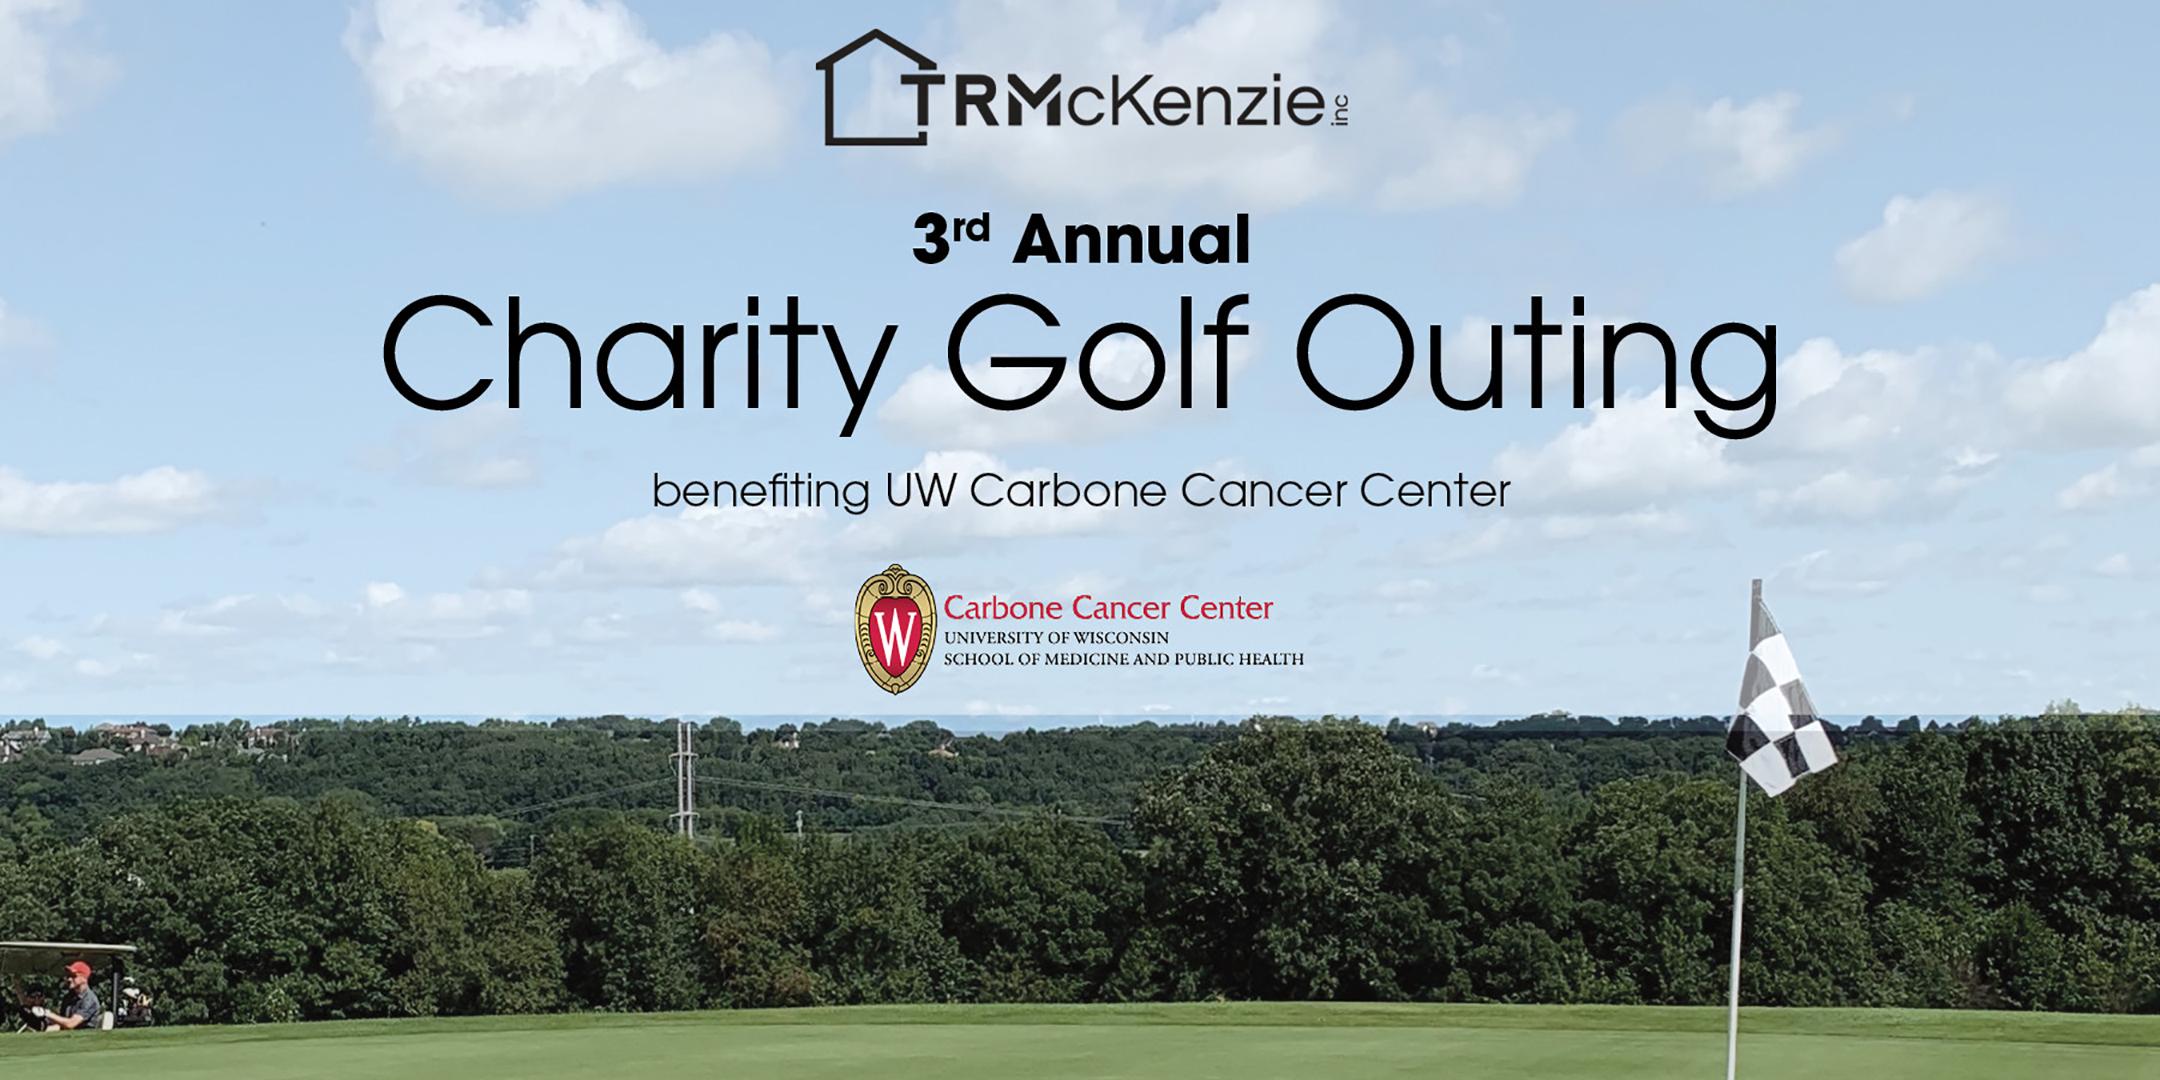 T.R. McKenzie's 2021Charity Golf Outing